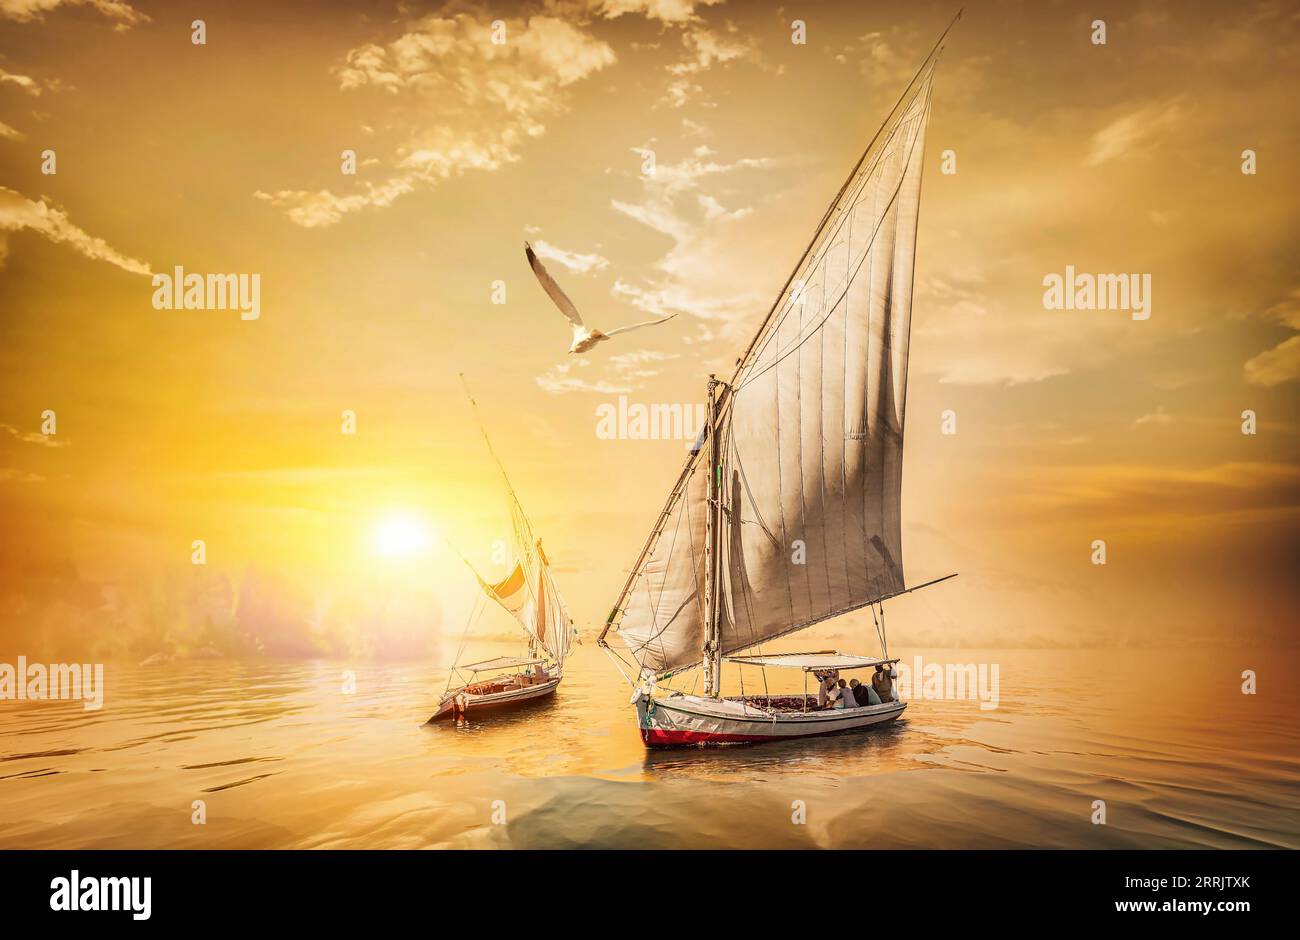 Bird over sailboats at fiery sunset on river Stock Photo